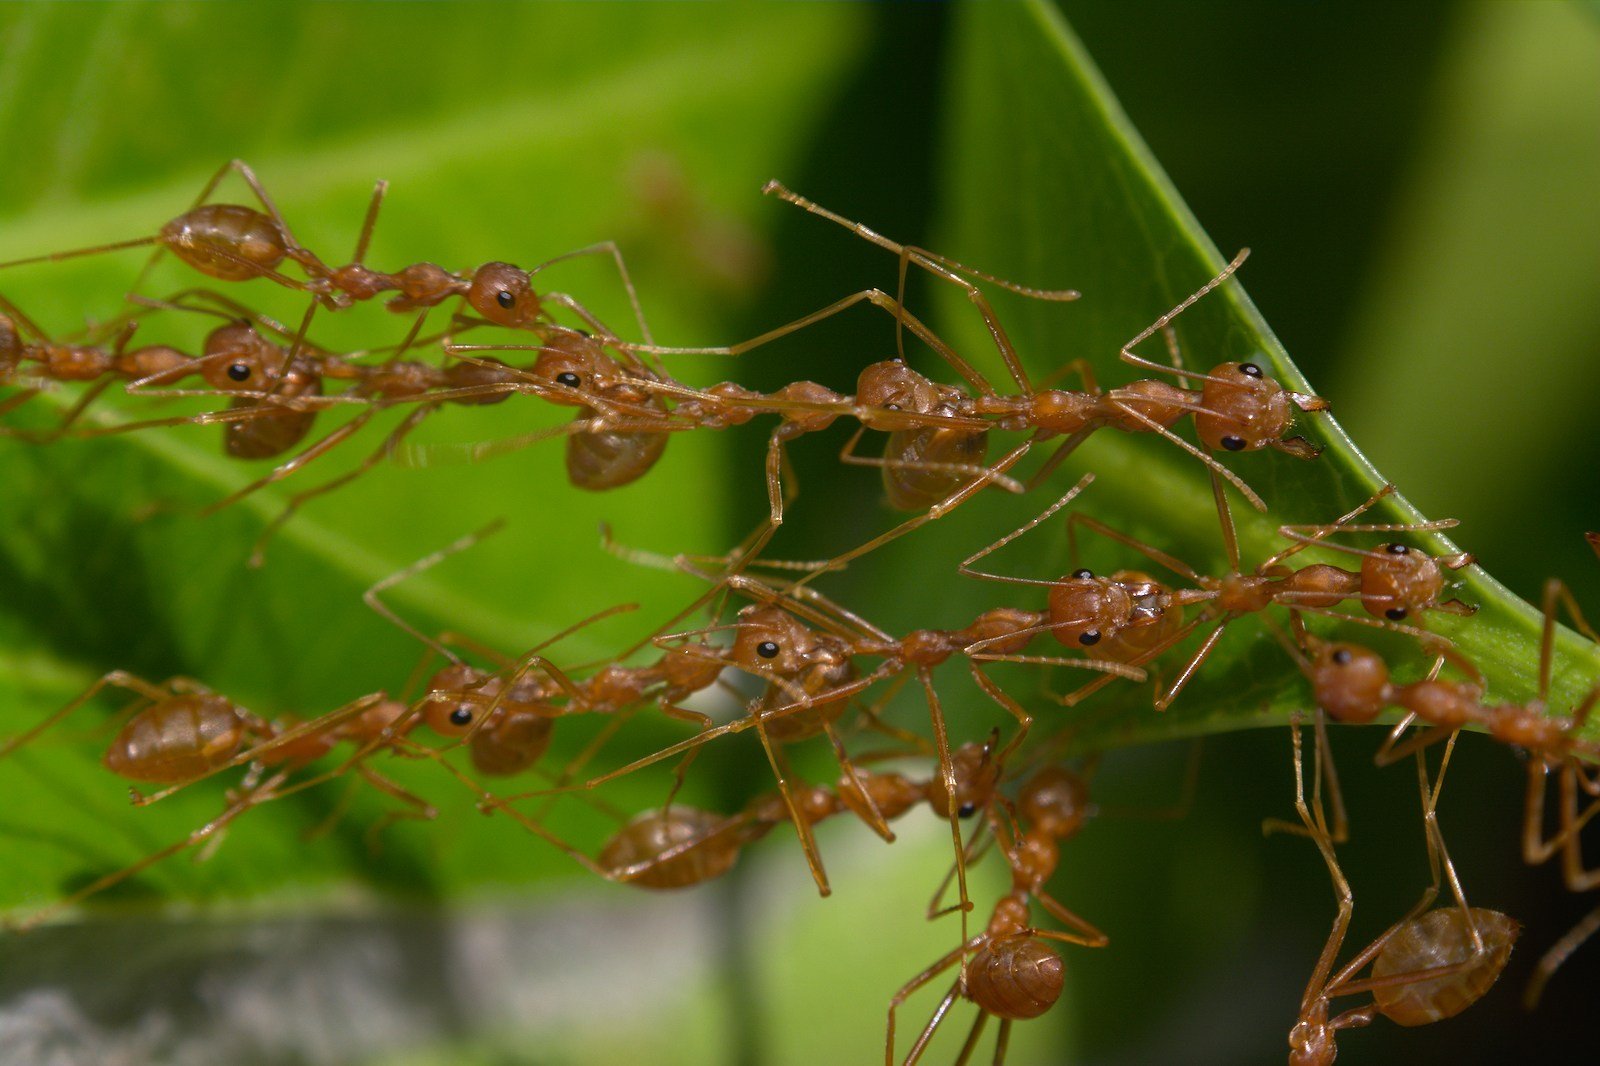 Singapore ants exhibition lets you see the queen & its colonies up close till 31 Dec